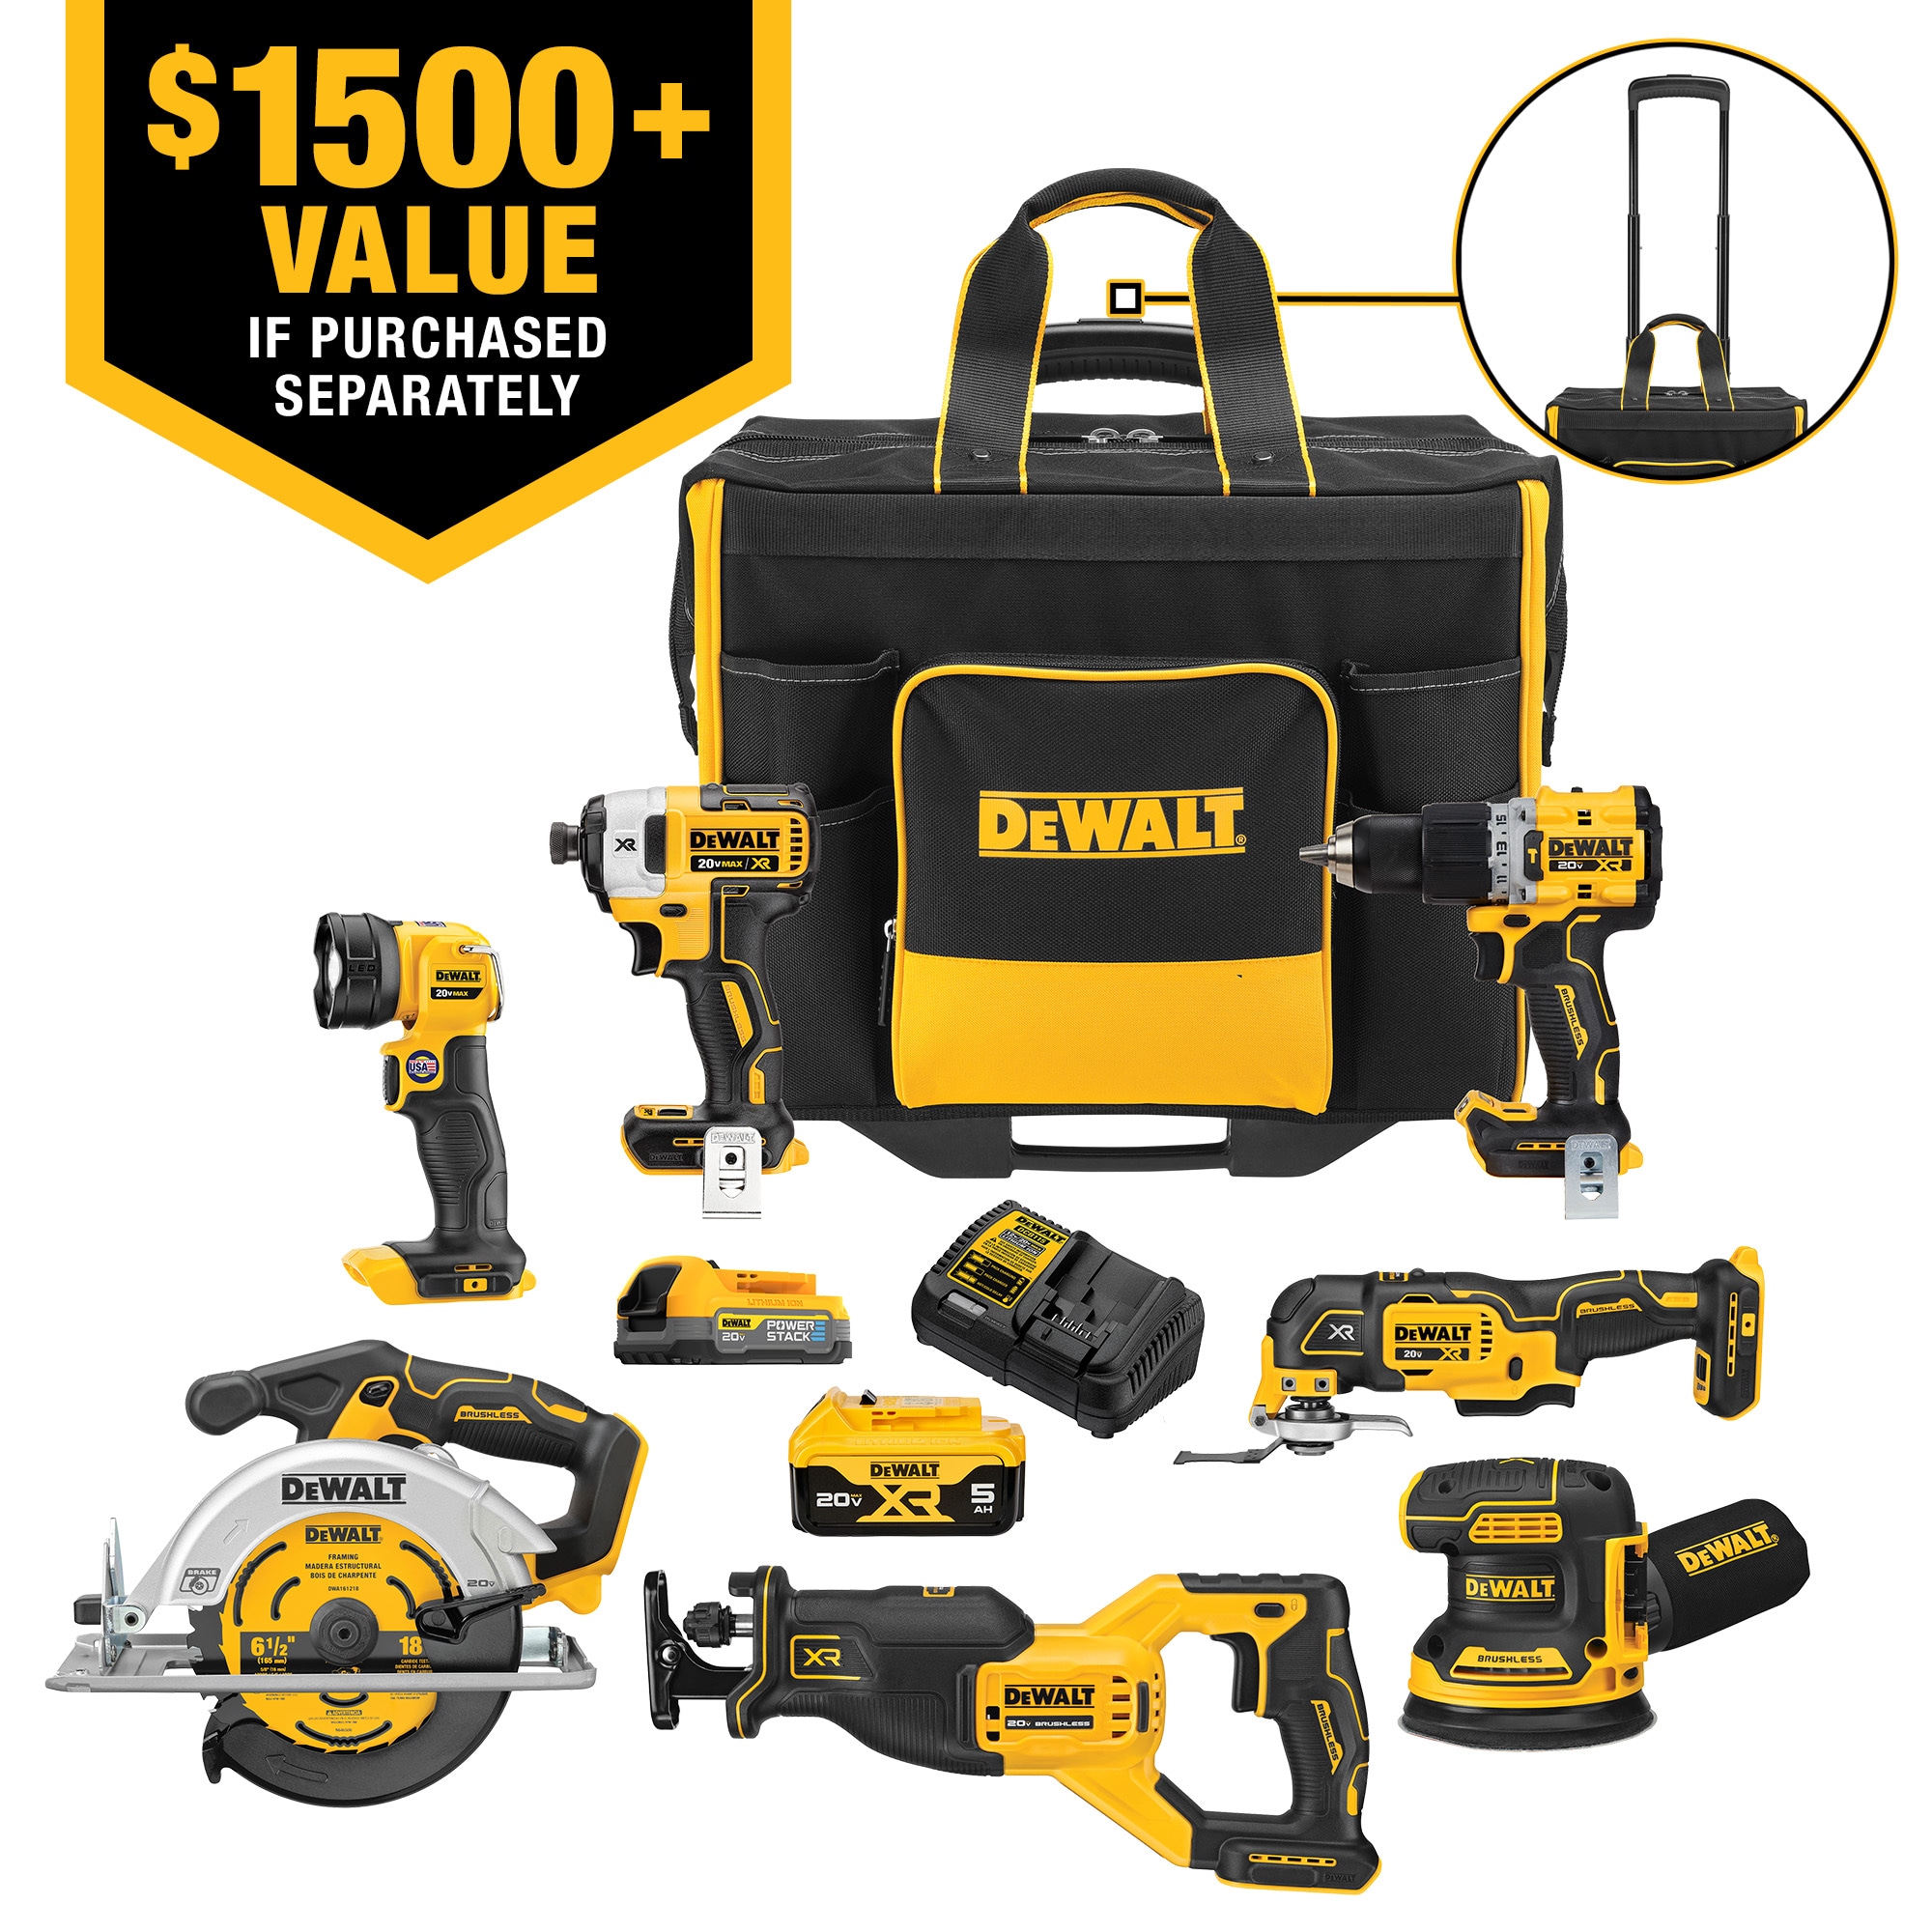 DEWALT 20V MAX Site-Ready XR 7 Tool Combo Kit (with 2 Batteries, Charger and Storage Bag) in the Power Combo Kits at Lowes.com